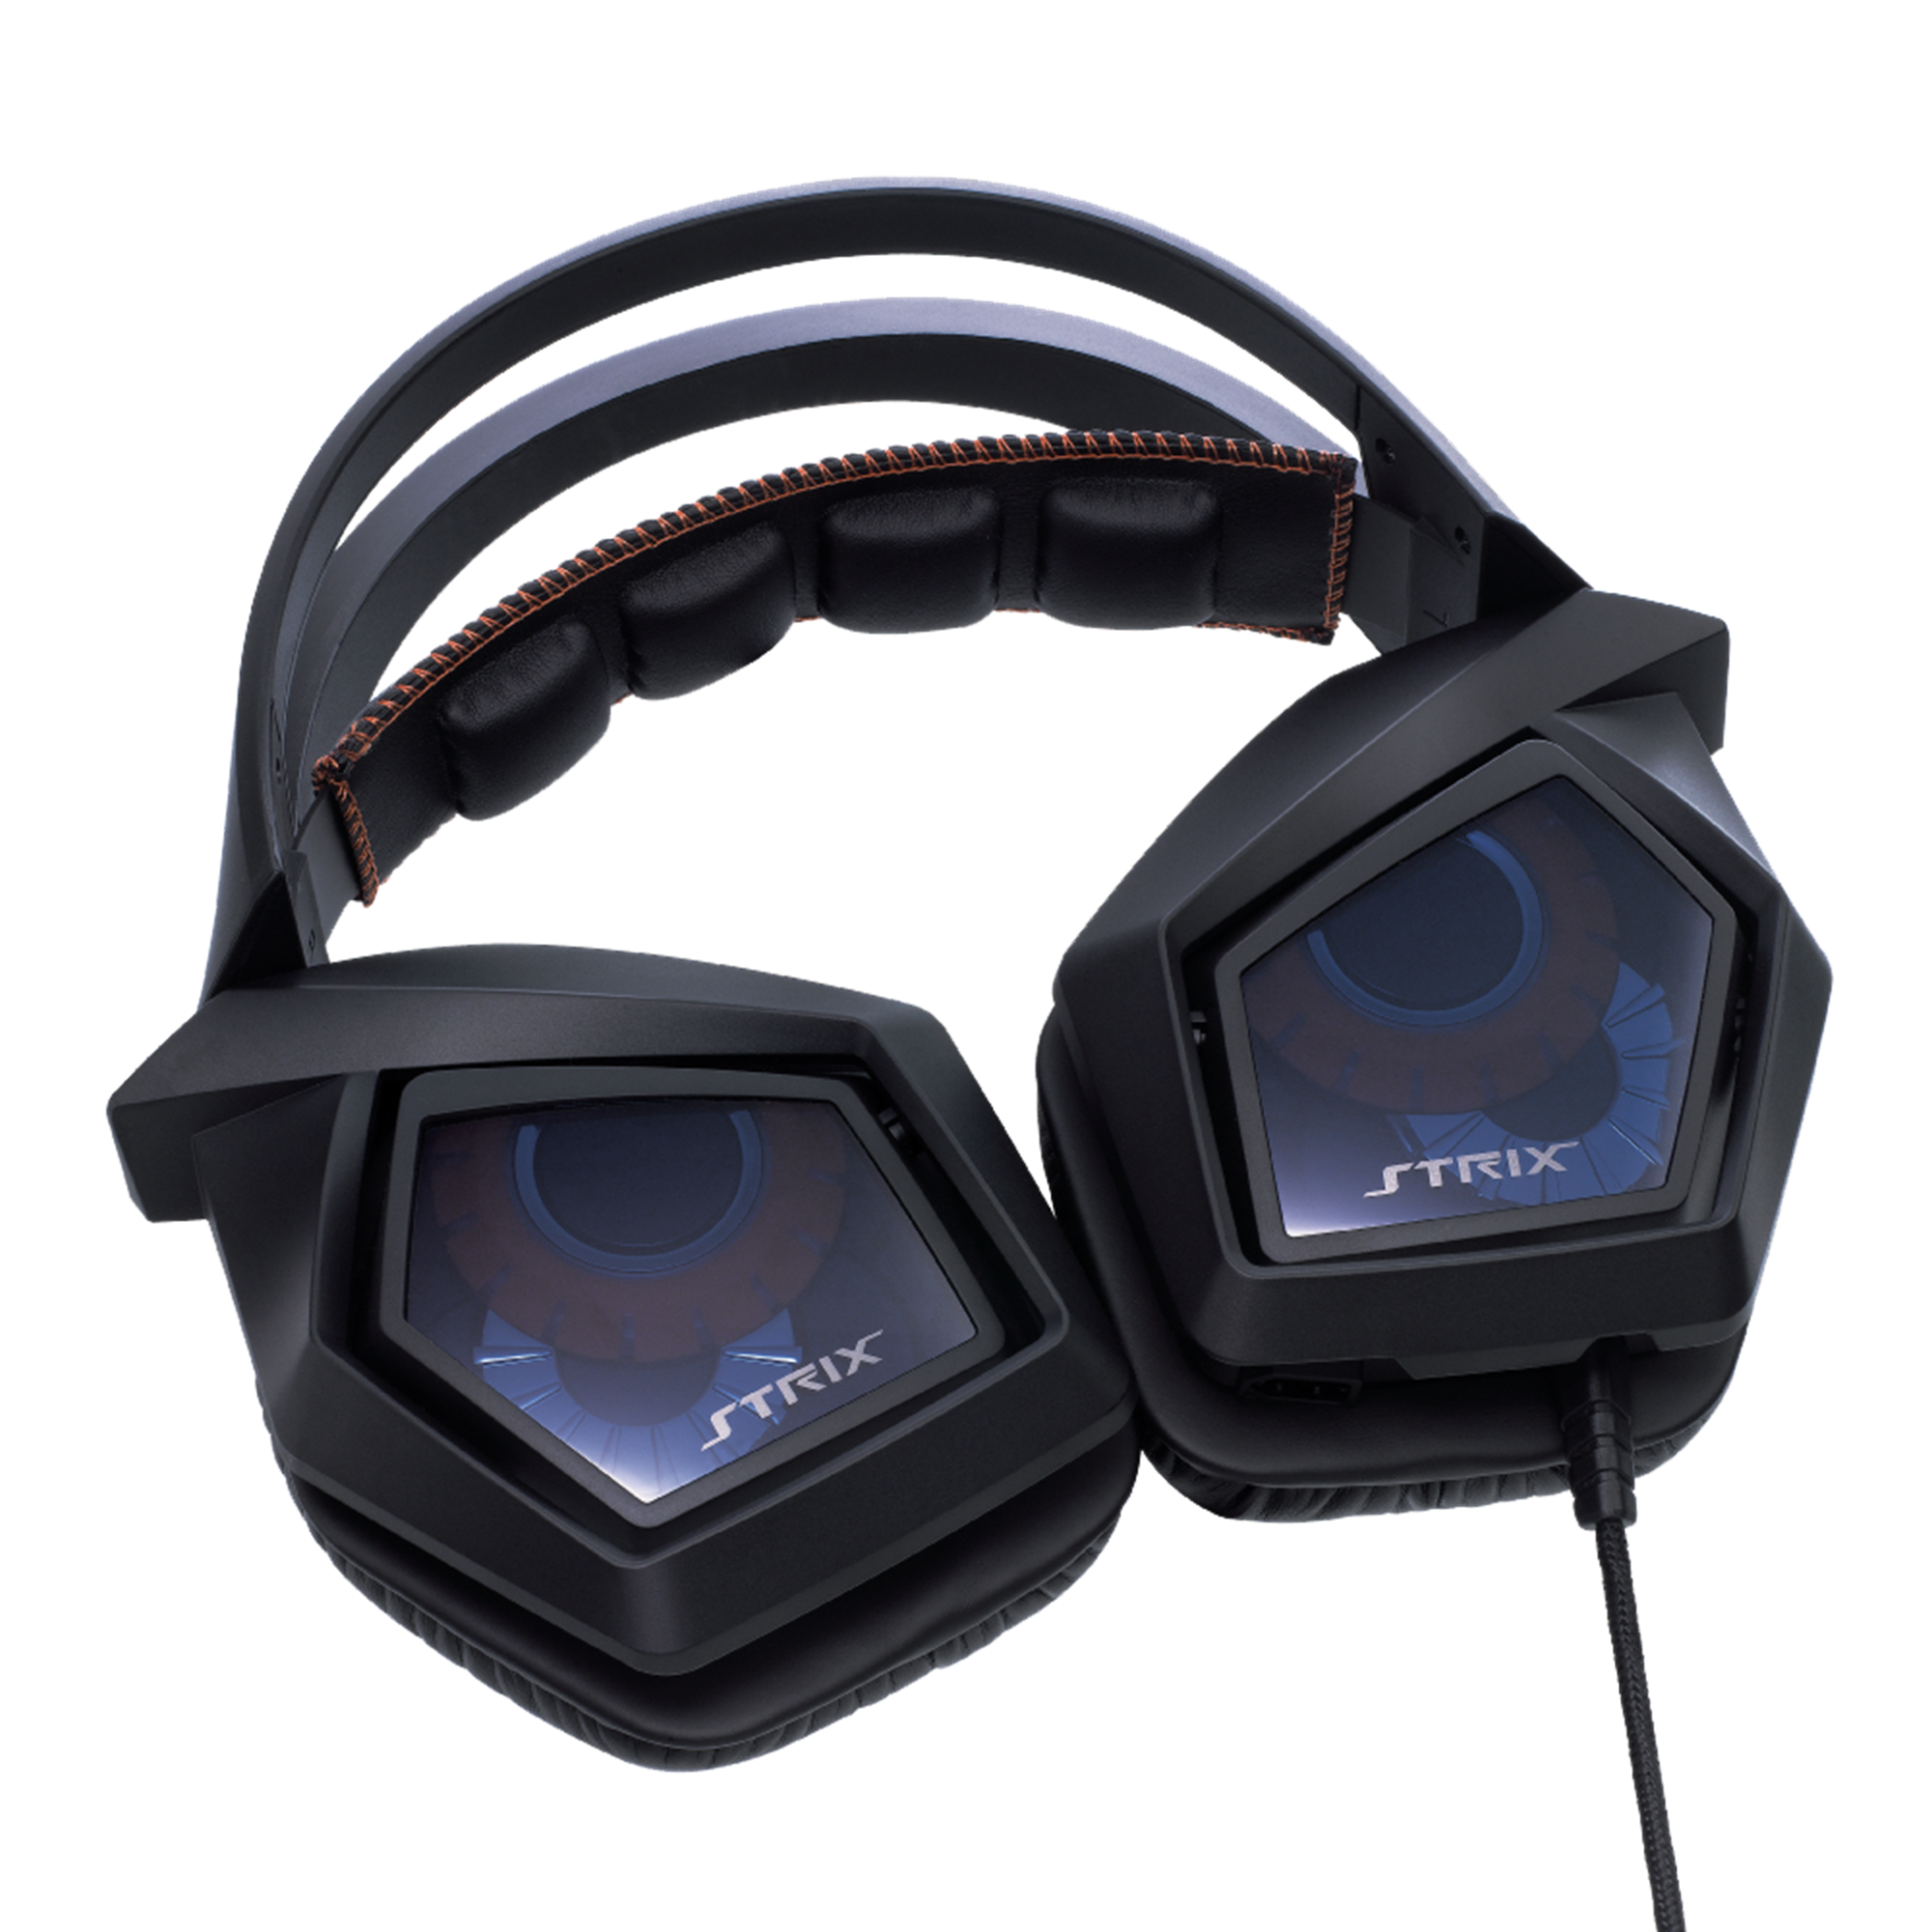 Strix 7 1 Headsets And Audio Asus Global